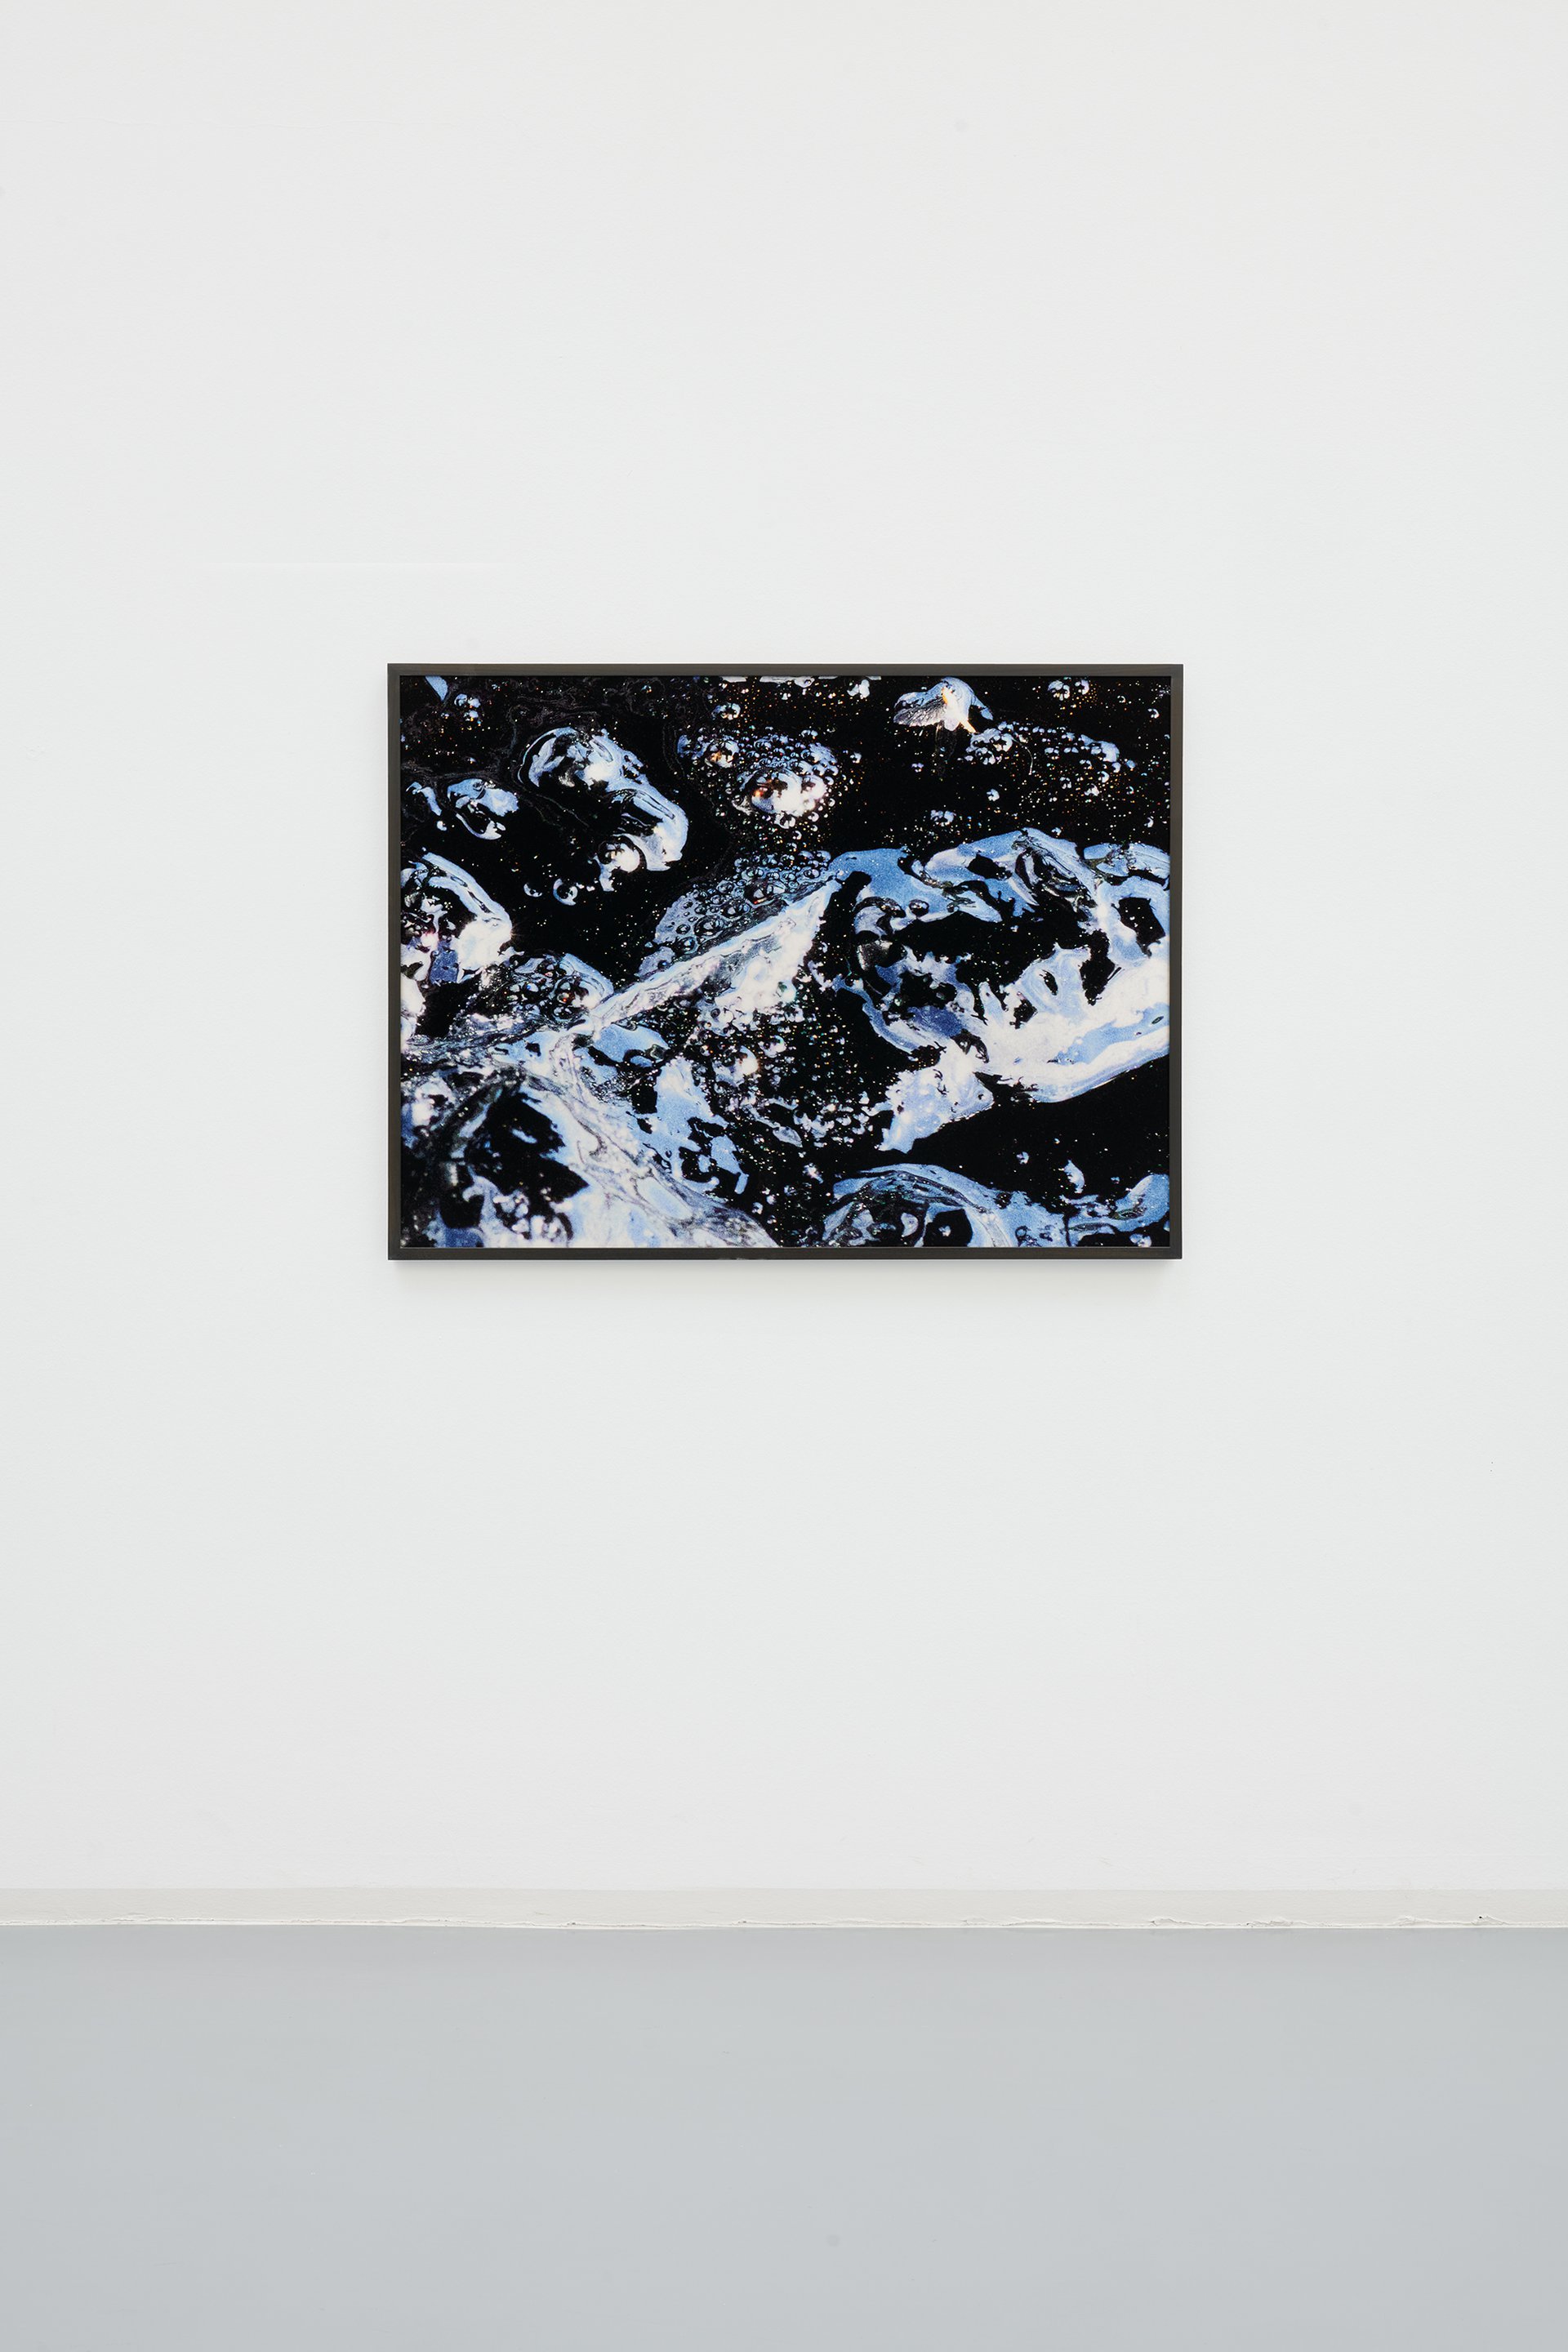 Lucie Stahl, Burrows (5), installation view, Lucie Stahl: Seven Sisters, Bonner Kunstverein, 2022. Courtesy the artist, Cabinet Gallery, London, dépendance, Brussels, Fitzpatrick Gallery, Paris and Los Angeles, and Galerie Meyer Kainer, Vienna. Photo: Mareike Tocha.